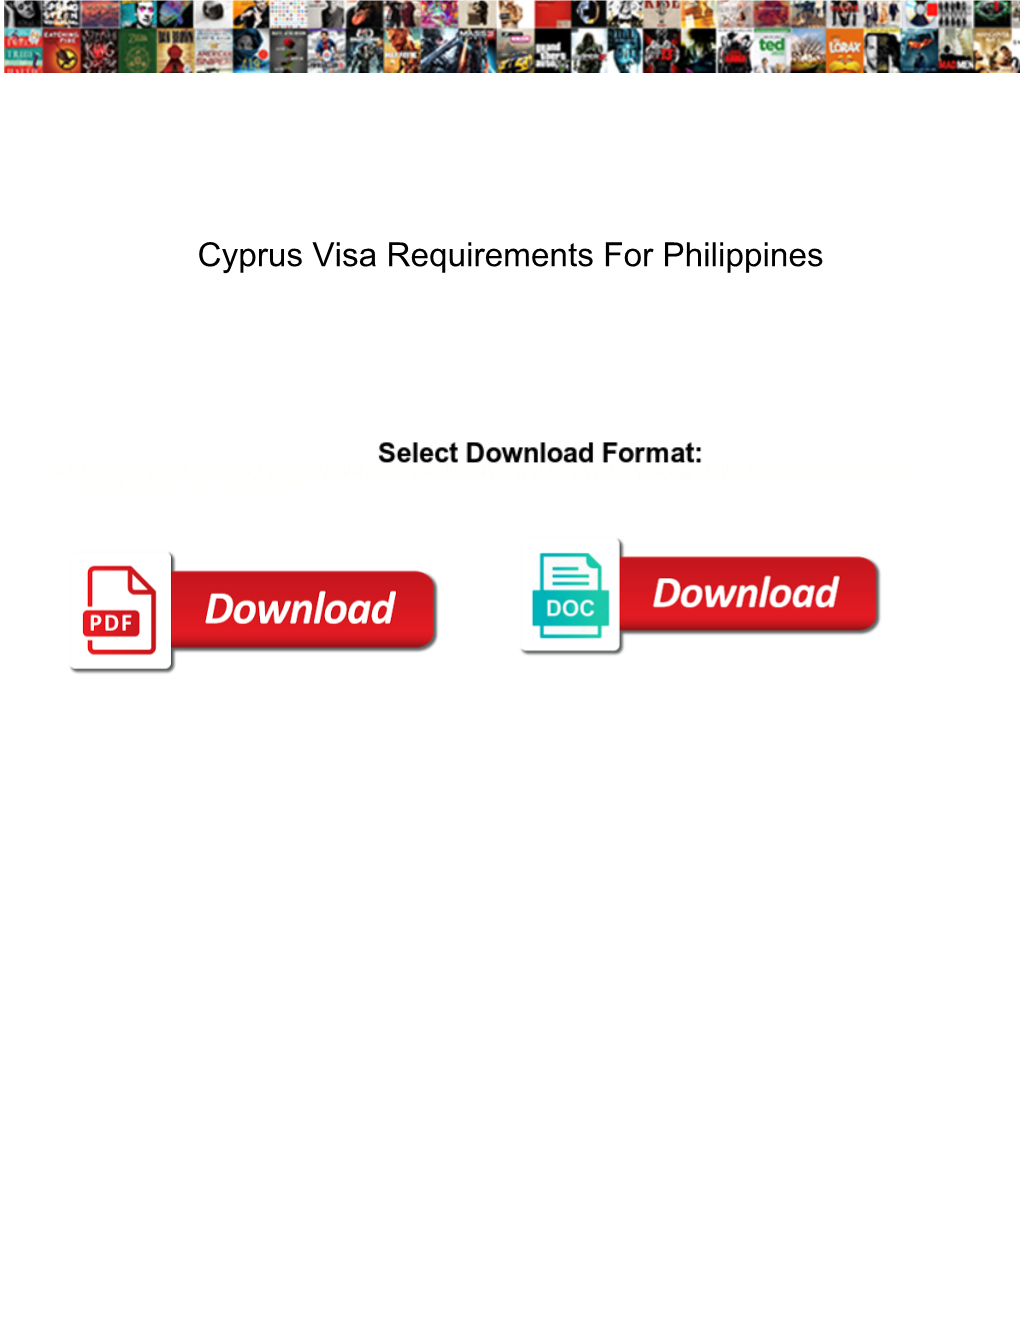 Cyprus Visa Requirements for Philippines